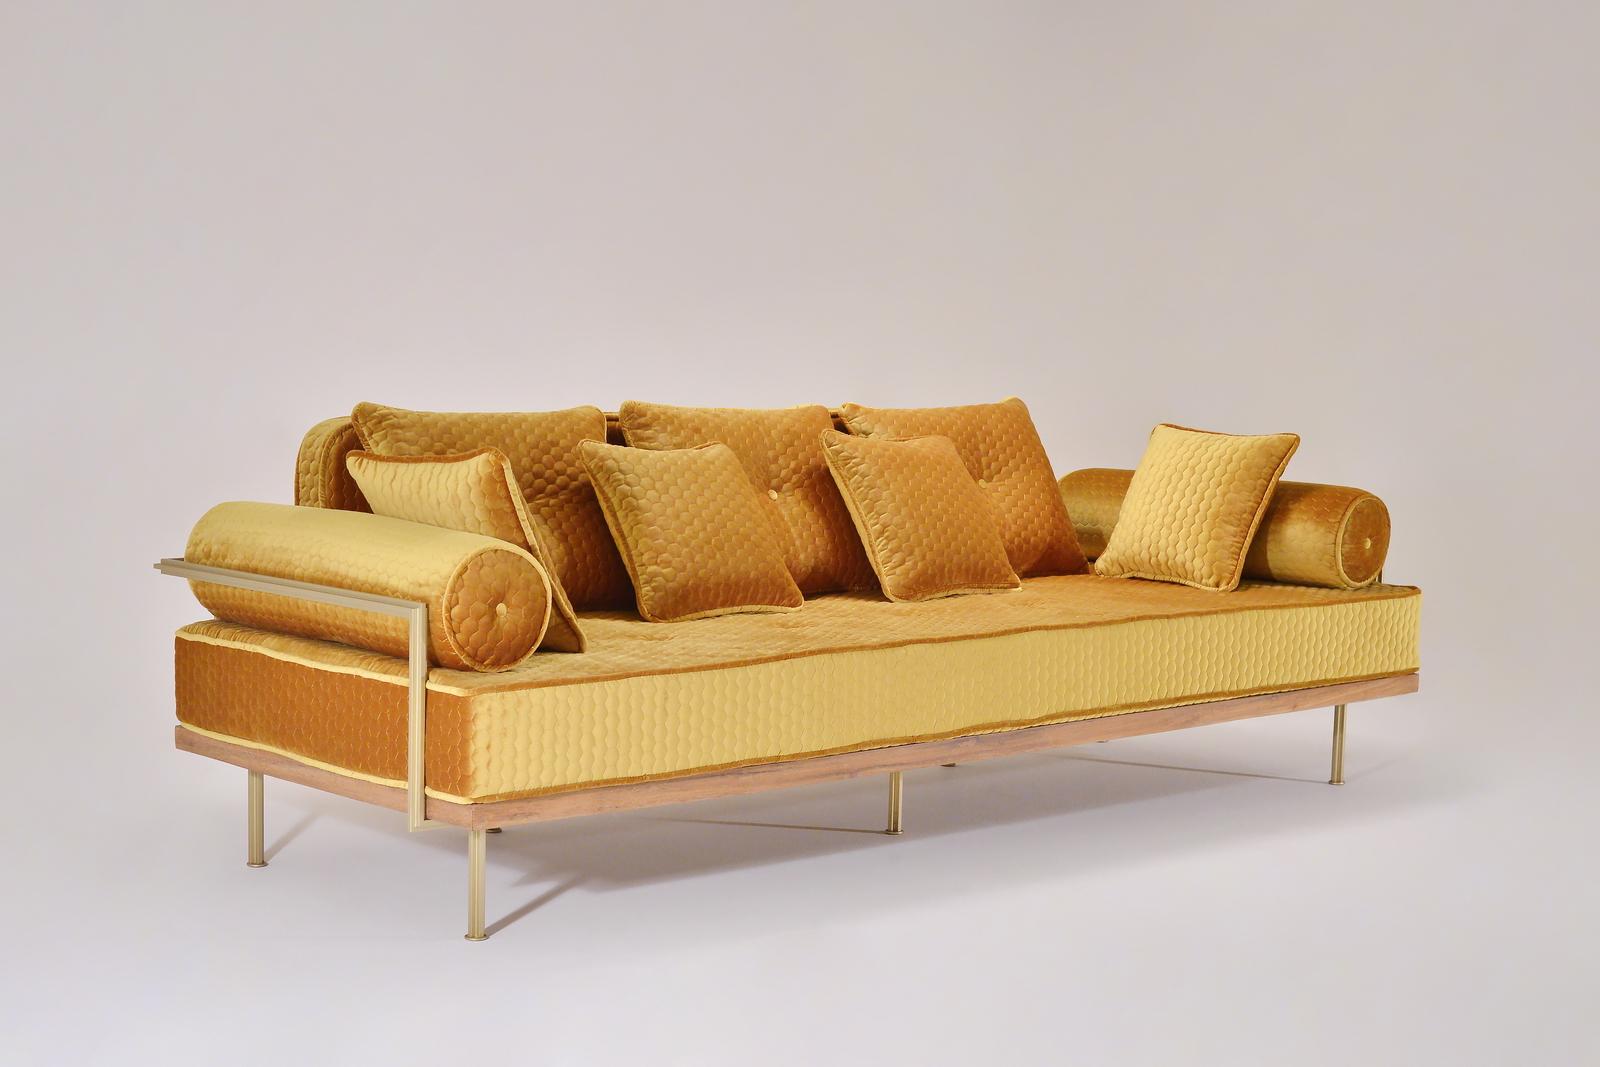 We created this gold three-seater sofa to on in our, 